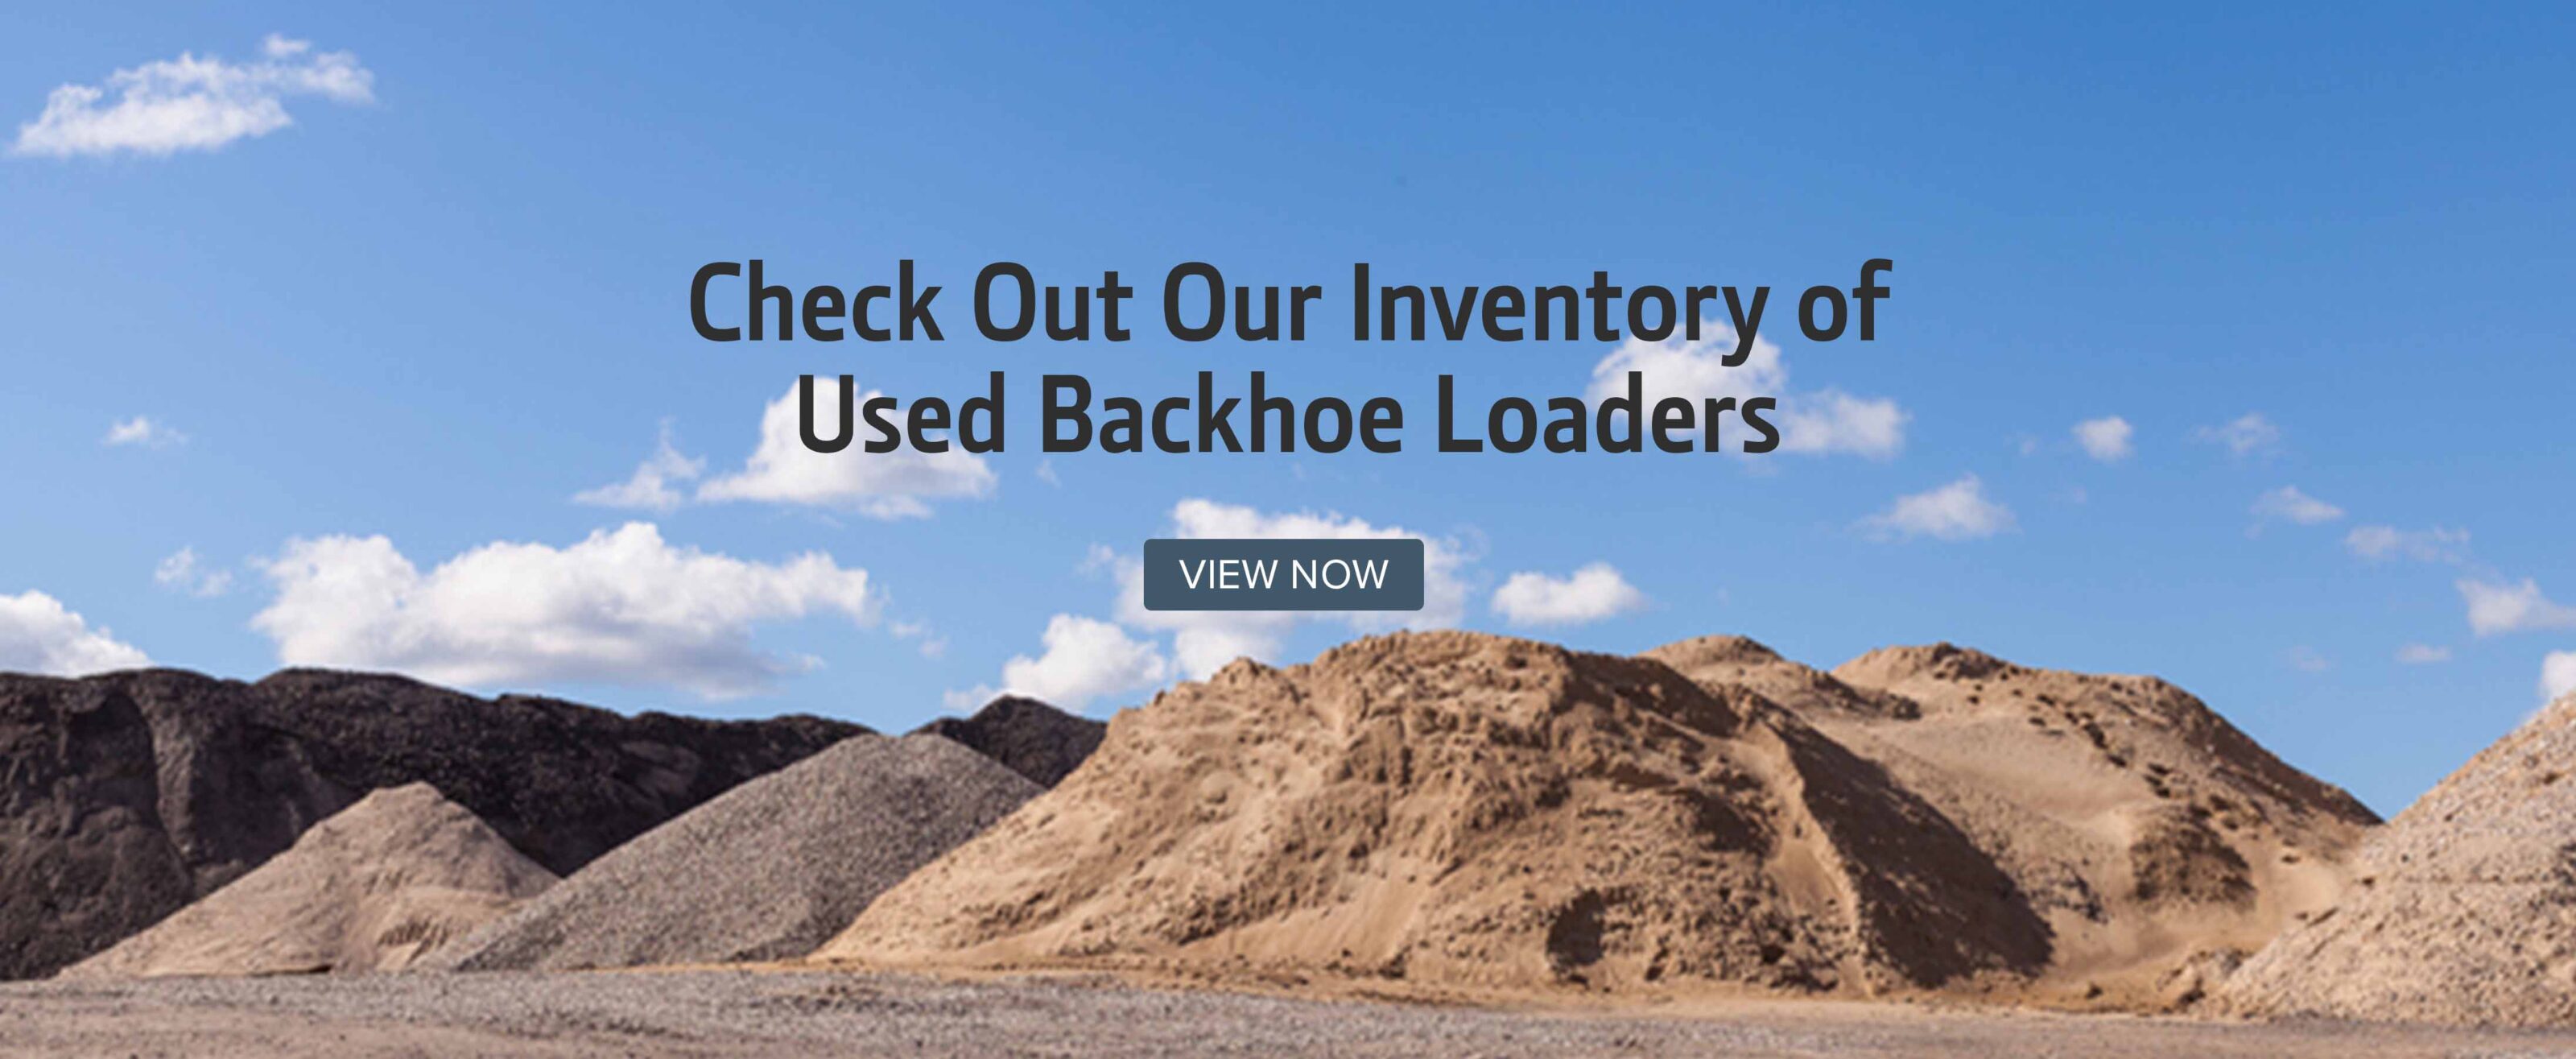 Check Out Our Inventory of Used Backhoe Loaders